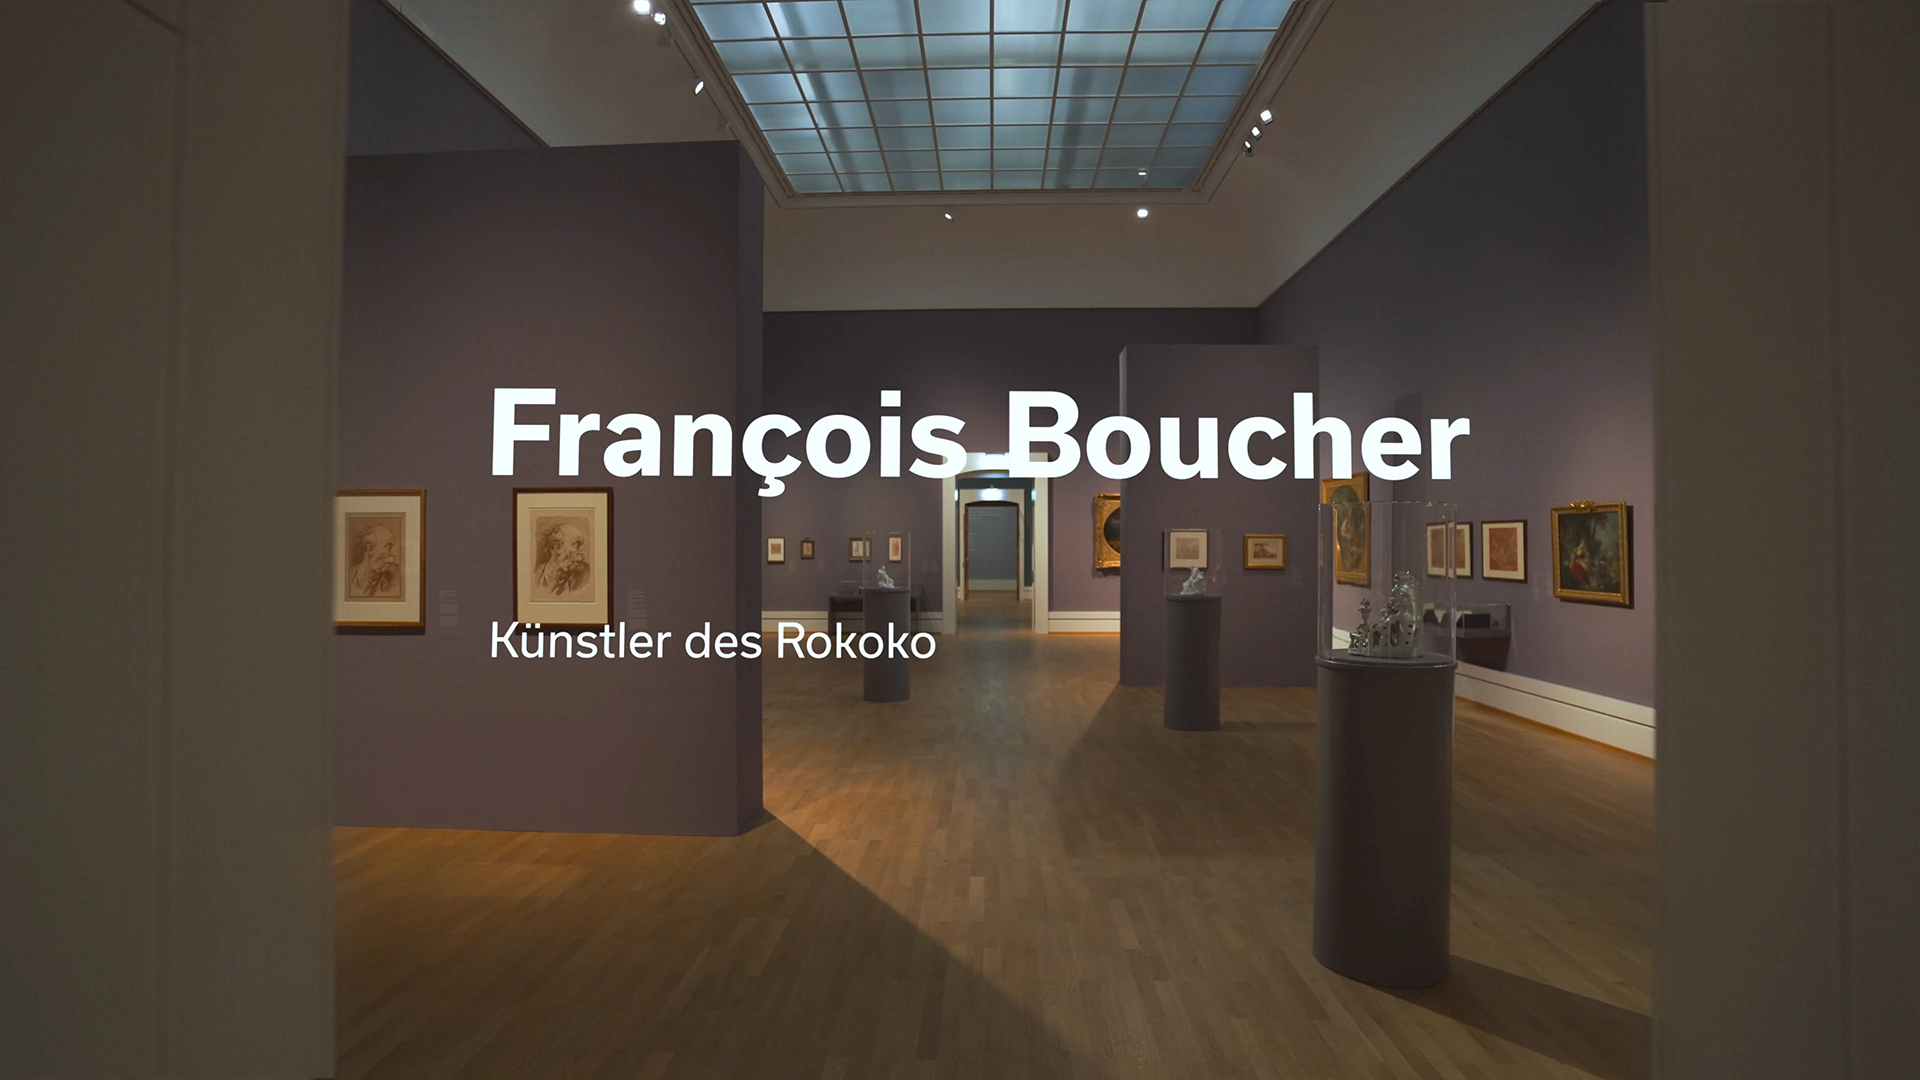 Video still from the teaser for the Boucher exhibition with a view of the gallery rooms where Boucher's works hang on the walls.